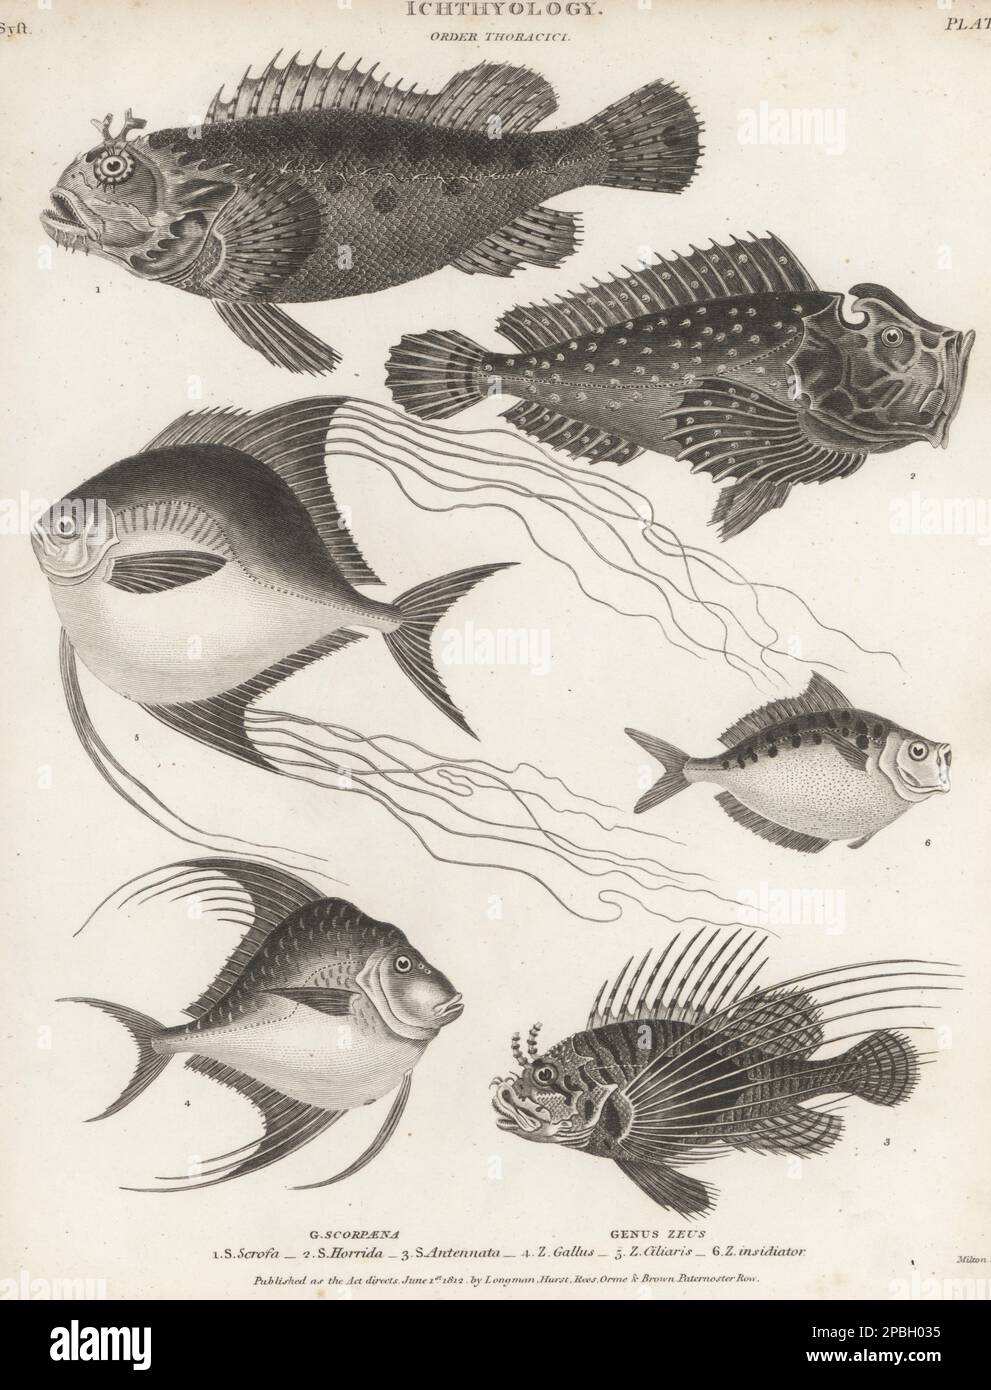 Red scorpionfish, Scorpaena scrofa 1, estuarine stonefish, Synanceia horrida 2, spotfin lionfish, Pterois antennata 3, African pompano, Alectis ciliaris 4,5, and pugnose ponyfish, Deveximentum insidiator 6. Copperplate engraving by Thomas Milton from Abraham Rees' Cyclopedia or Universal Dictionary of Arts, Sciences and Literature, Longman, Hurst, Rees, Orme and Brown, Paternoster Row, London, June 1, 1812. Stock Photo